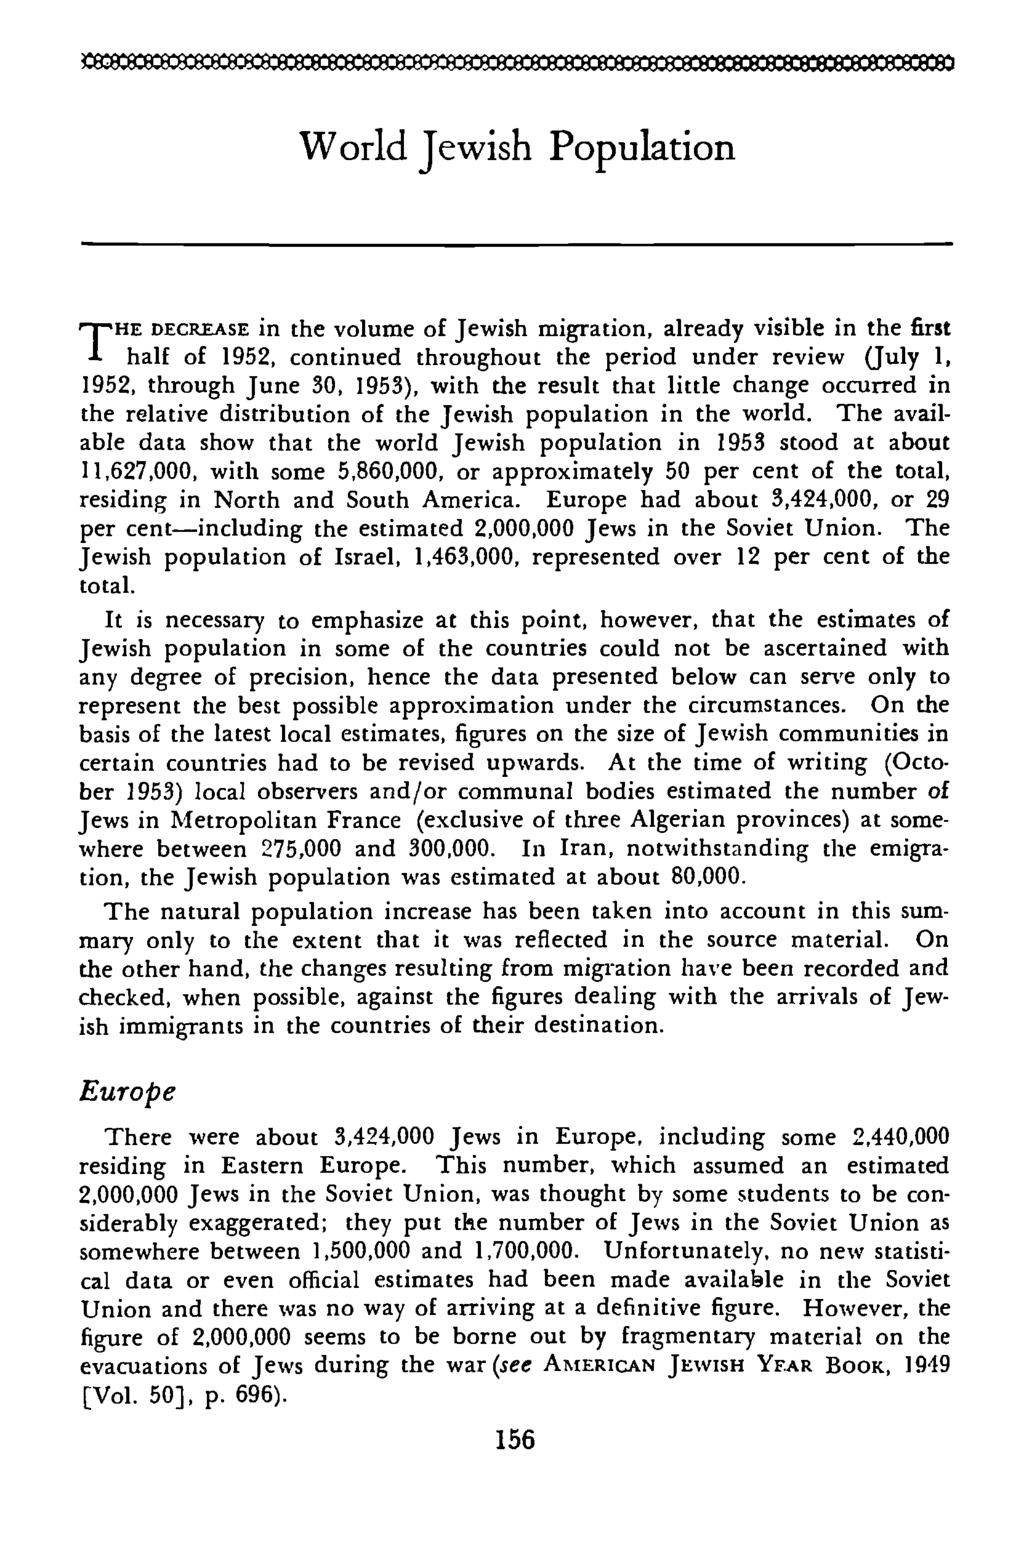 World Jewish "-phe DECREASE in the volume of Jewish migration, already visible in the first * half of 1952, continued throughout the period under review (July 1, 1952, through June 30, 1953), with